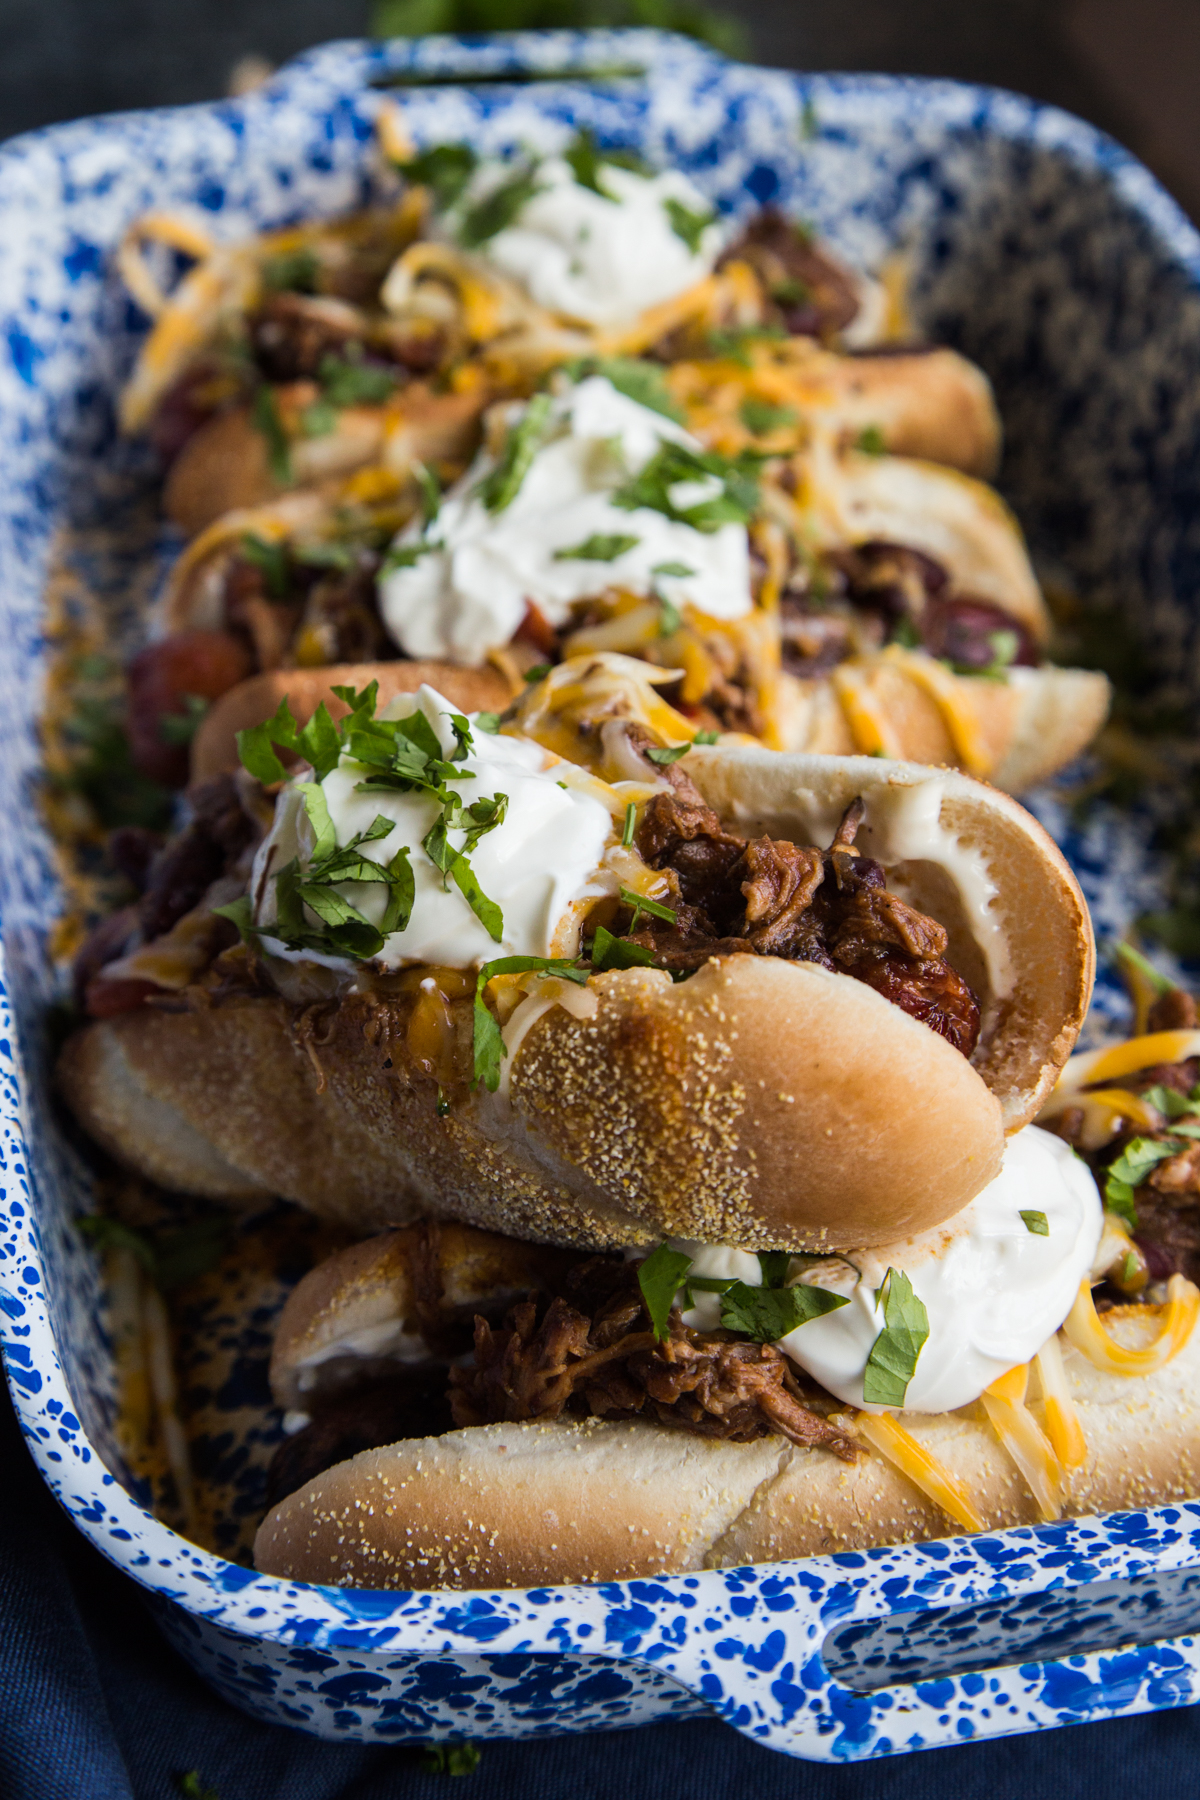 Chili Con Carne + GREAT for football watching and making into Chili Dogs!!